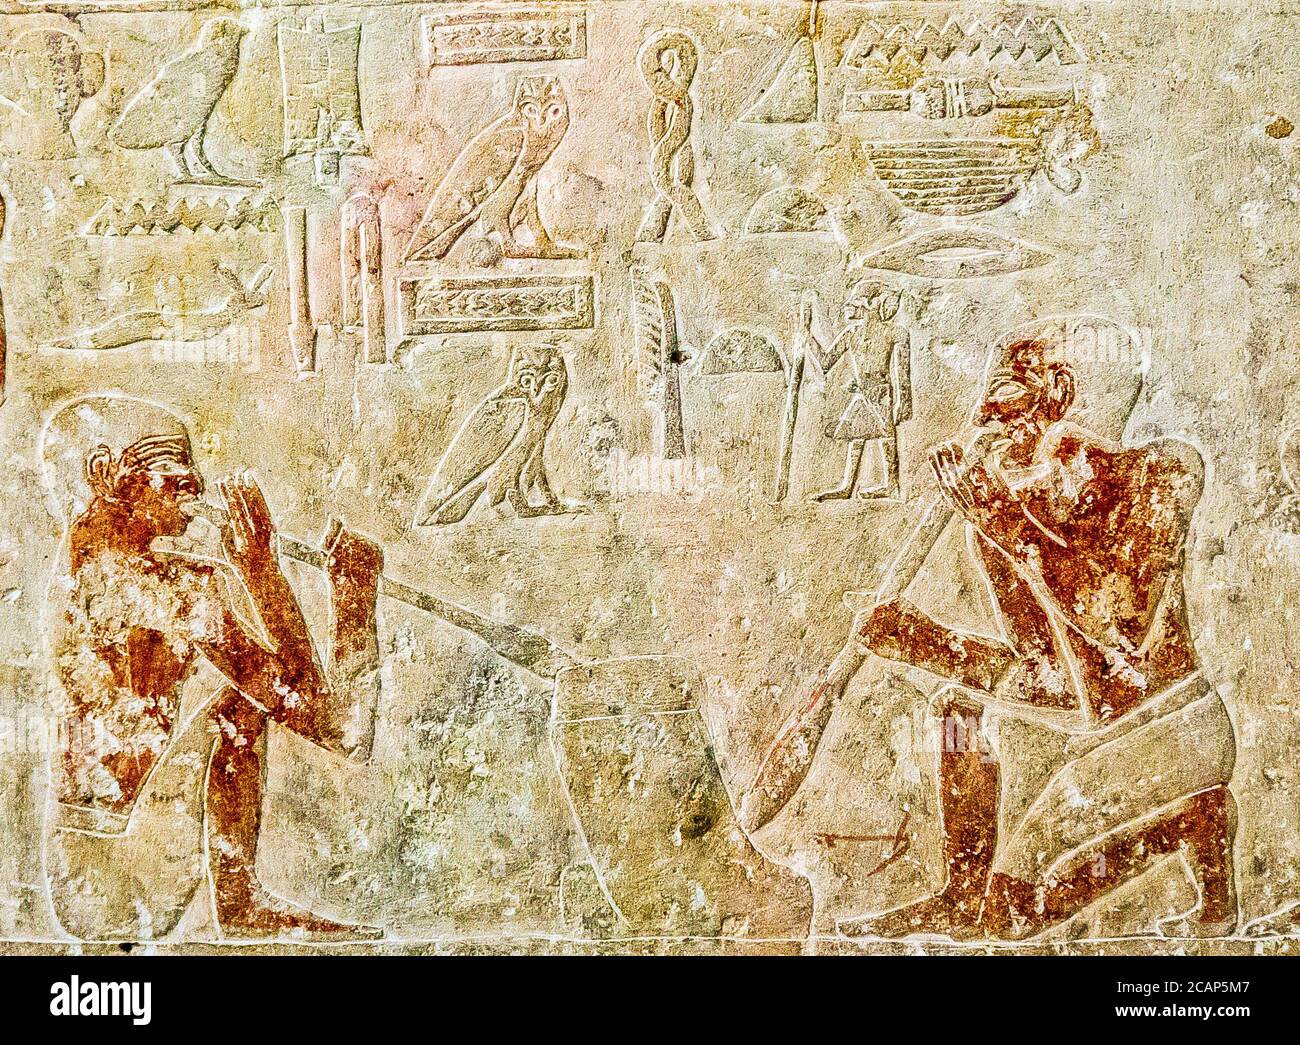 Egypt, Cairo, Egyptian Museum, from the tomb of Kaemrehu, Saqqara, detail of a big relief depicting craftsmen : Blowing gold. Stock Photo